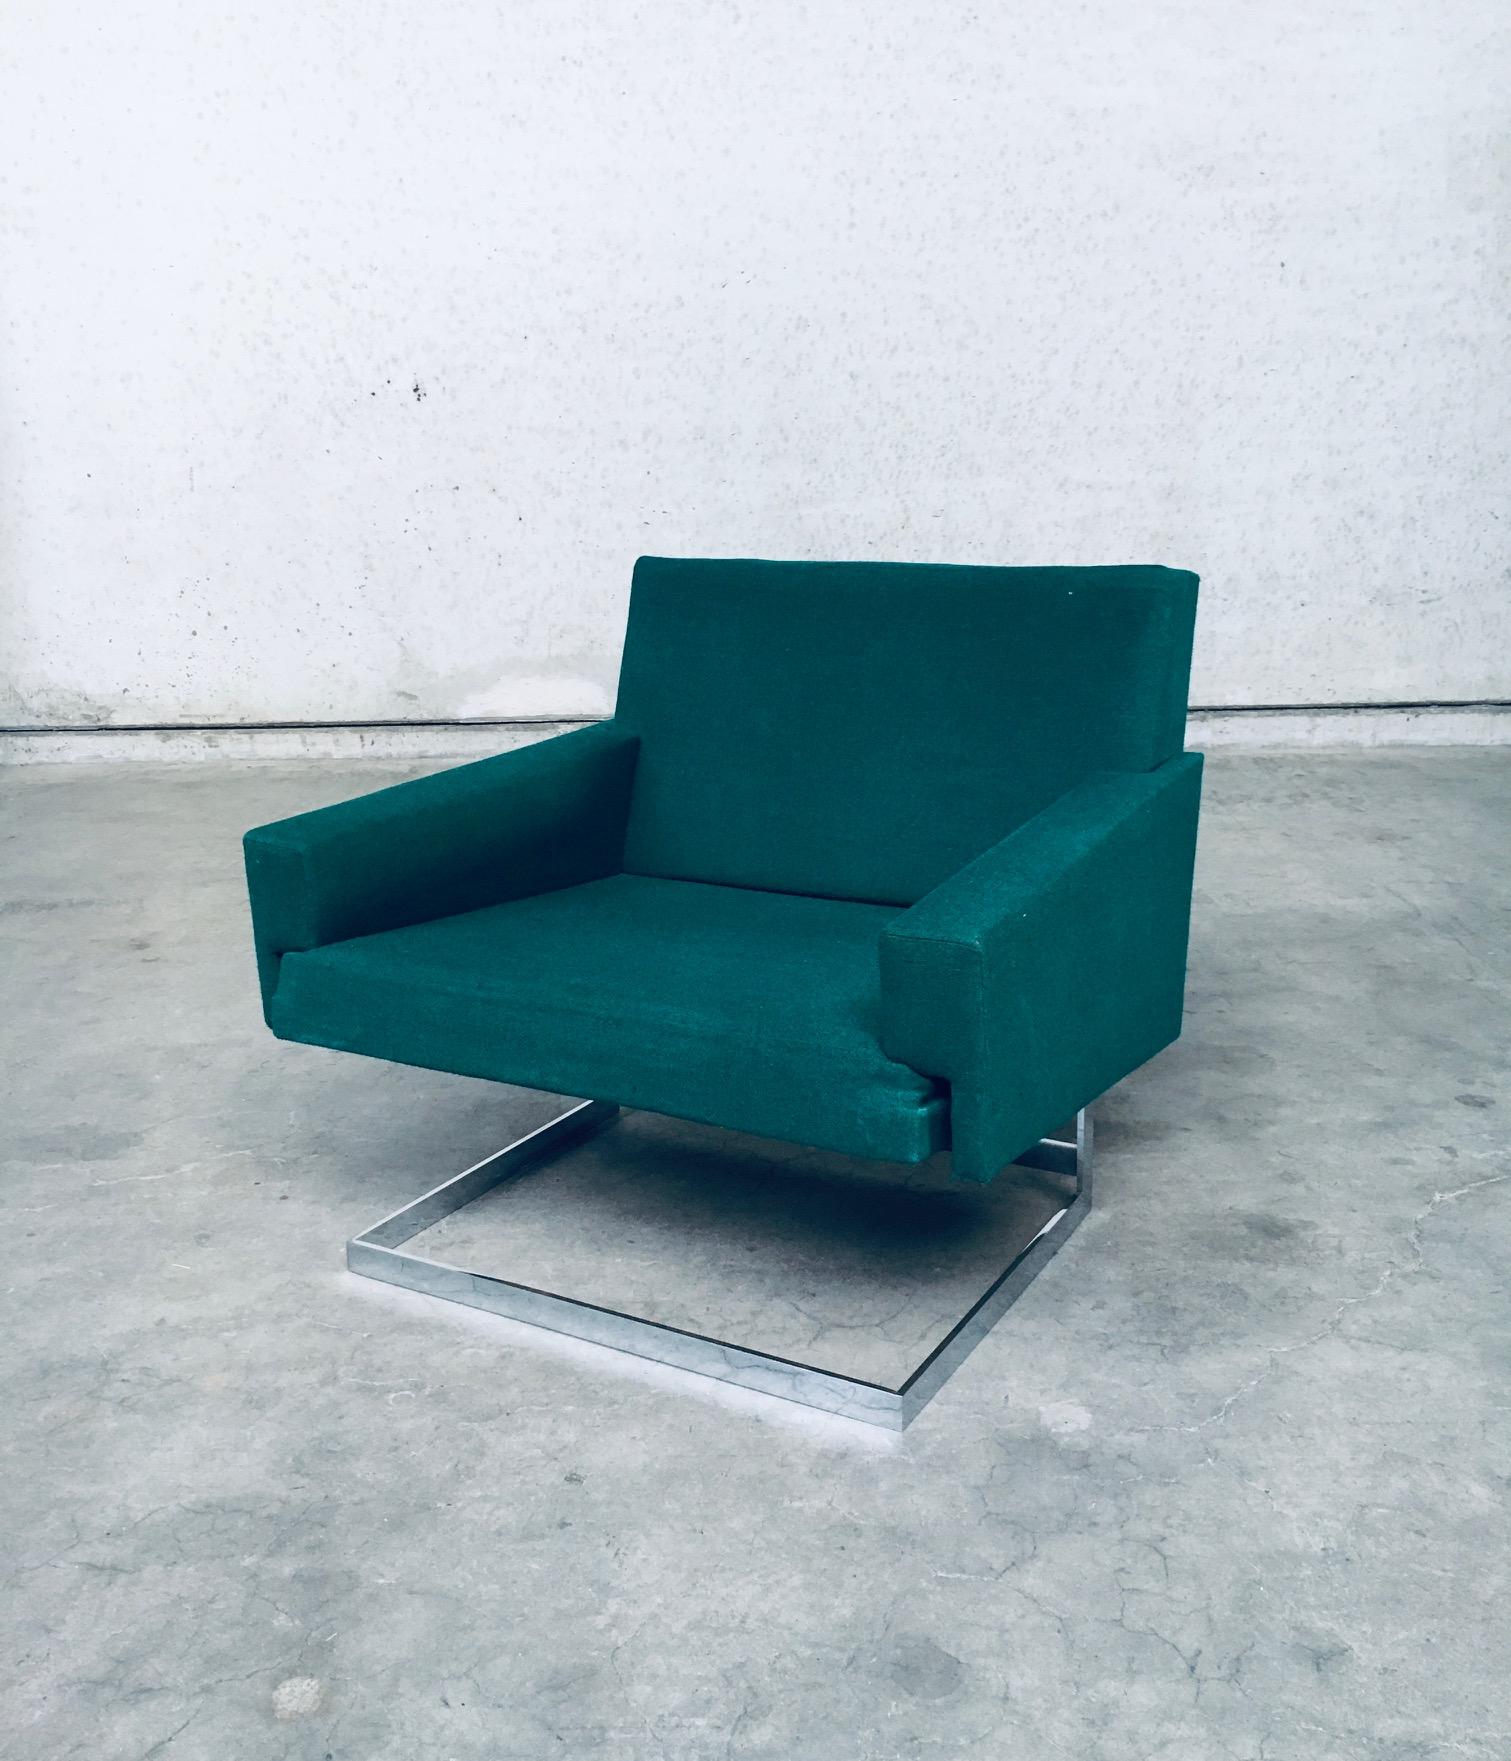 Vintage Midcentury Modern Belgian Design Floating Lounge Chair. Made in Belgium, 1960's period. Square architectural design arm chair in the manner of Pierre Guariche. Green fabric covered seat on chrome base. The chair has the impression to be